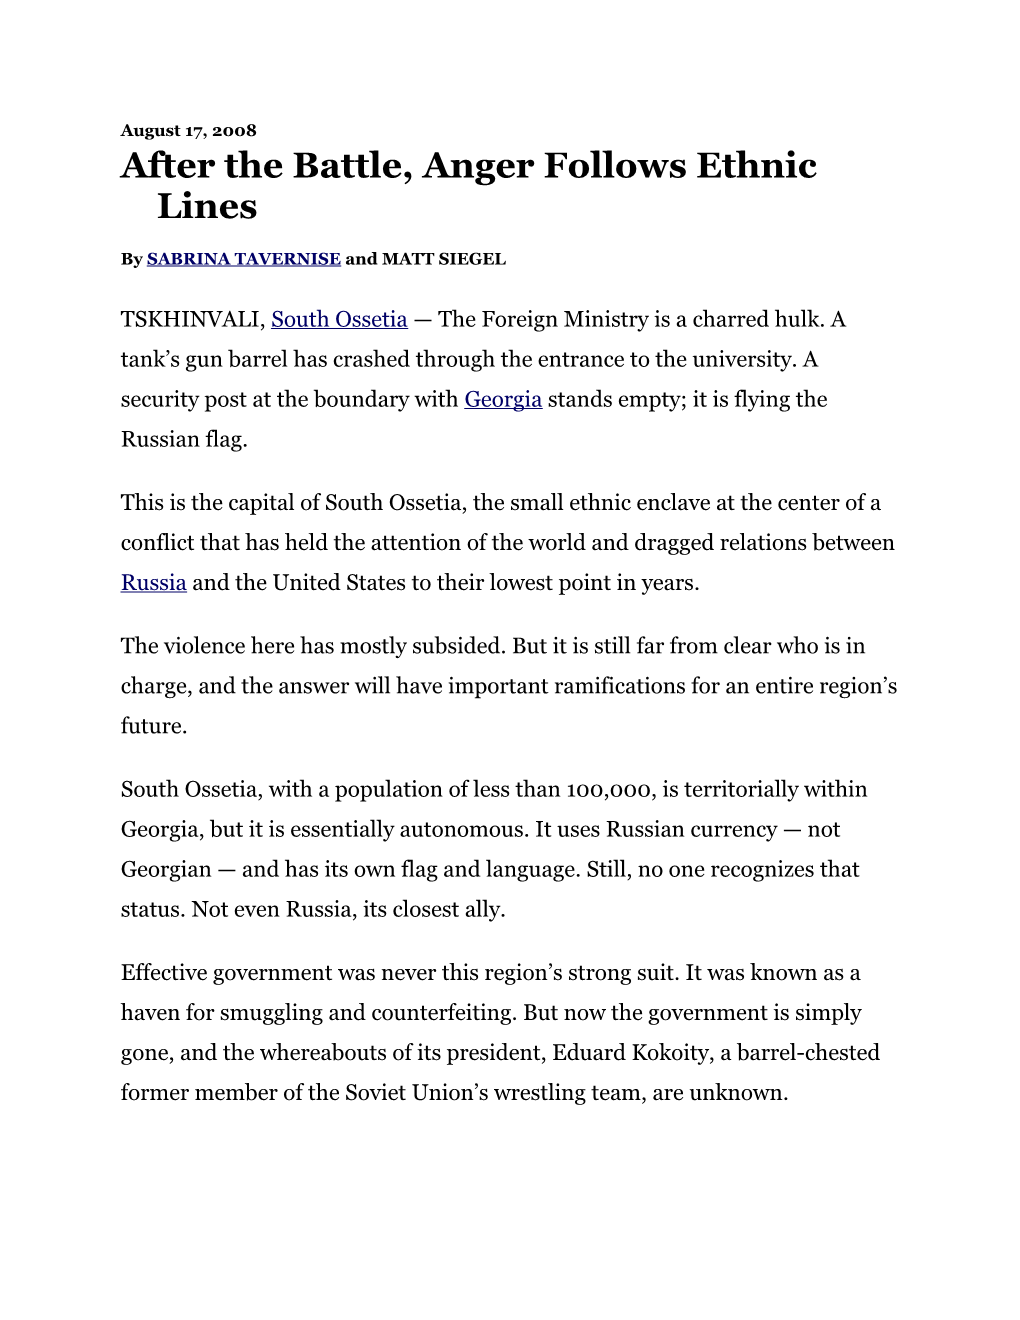 After the Battle, Anger Follows Ethnic Lines